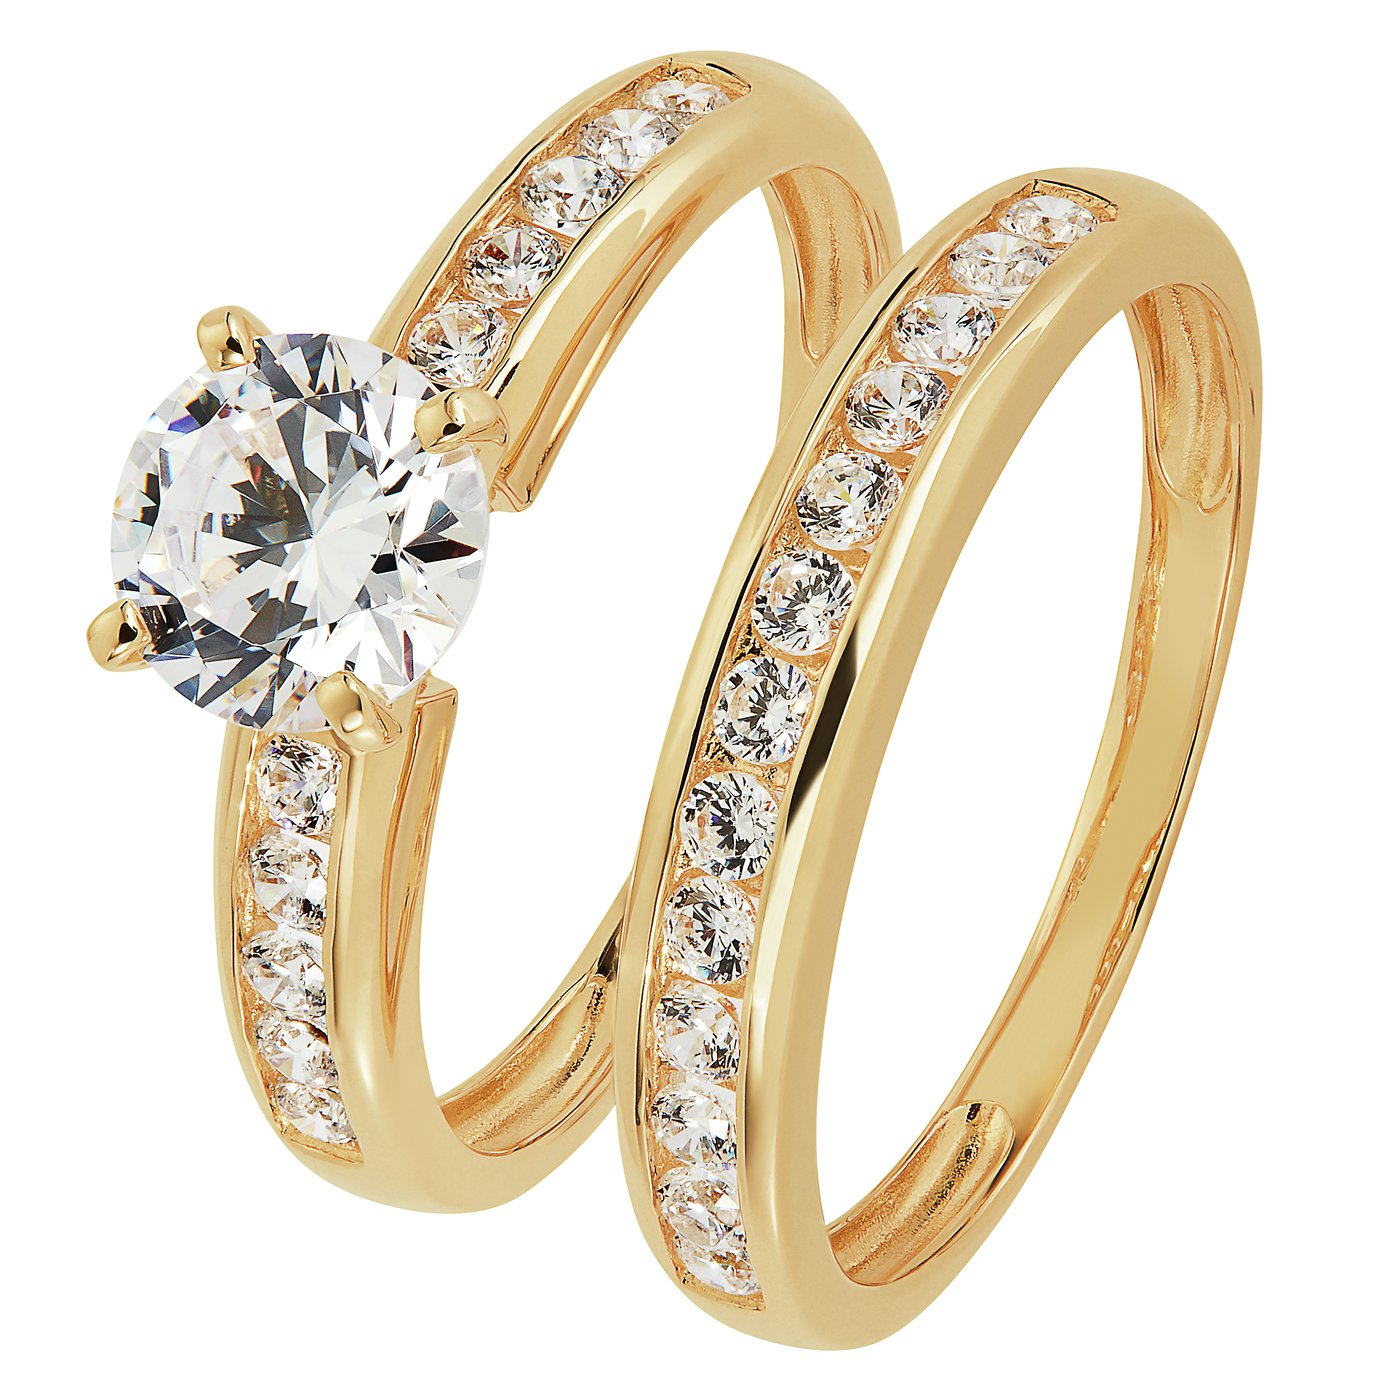 Revere 9ct Gold Cubic Zirconia Solitaire Engagement Ring - S